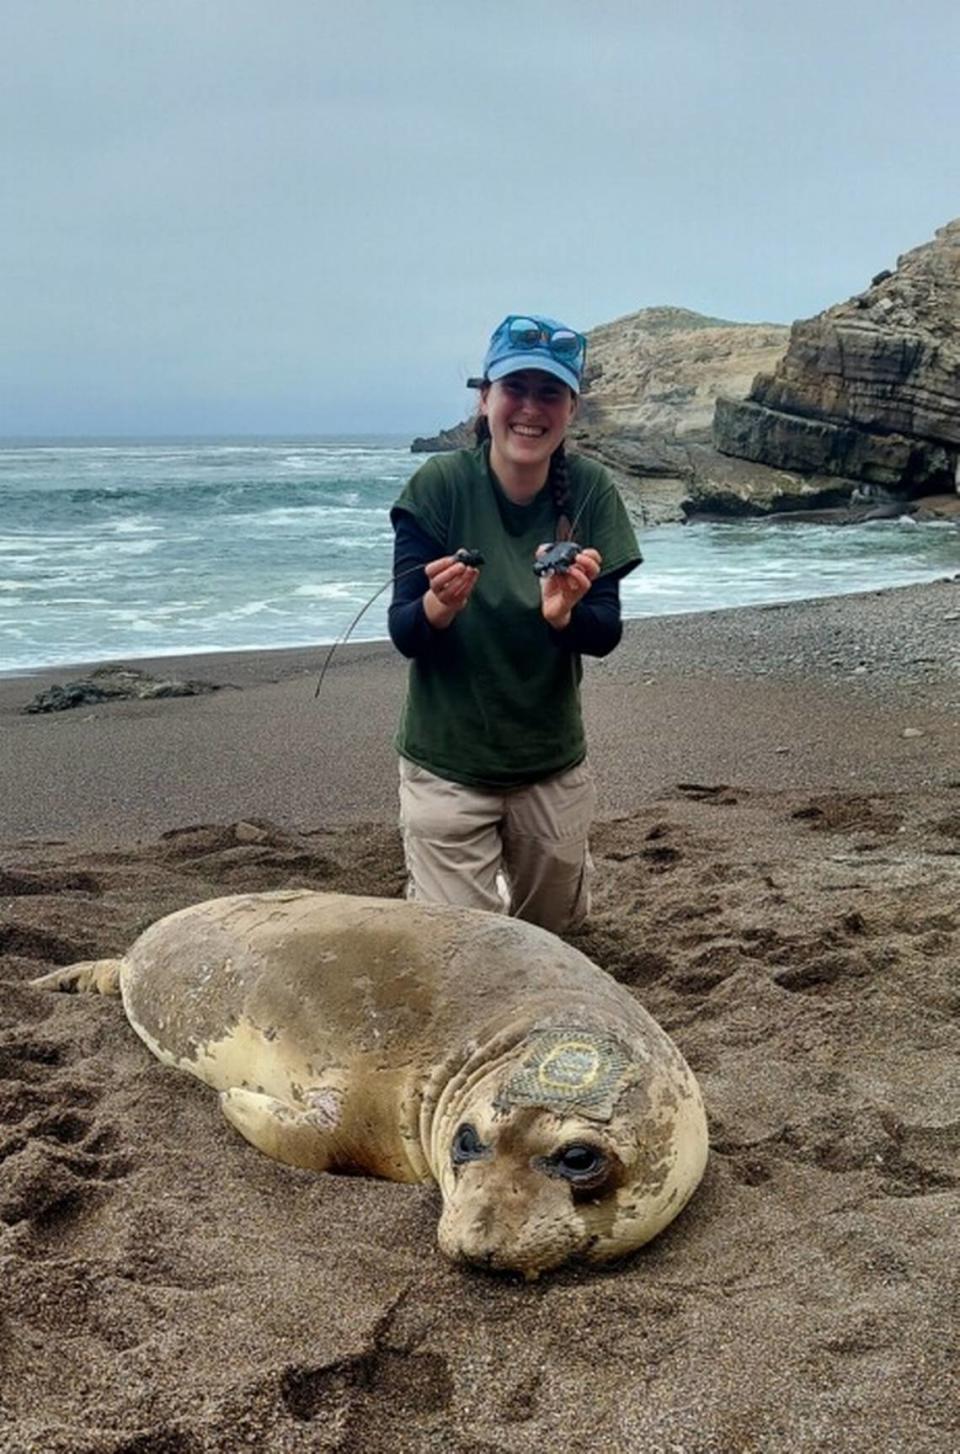 Graduate student Katie Saenger with Monarch, excited that the team successfully retrieved her tags. Activities performed and photo taken under NMFS permit 22187-04 and 27514.